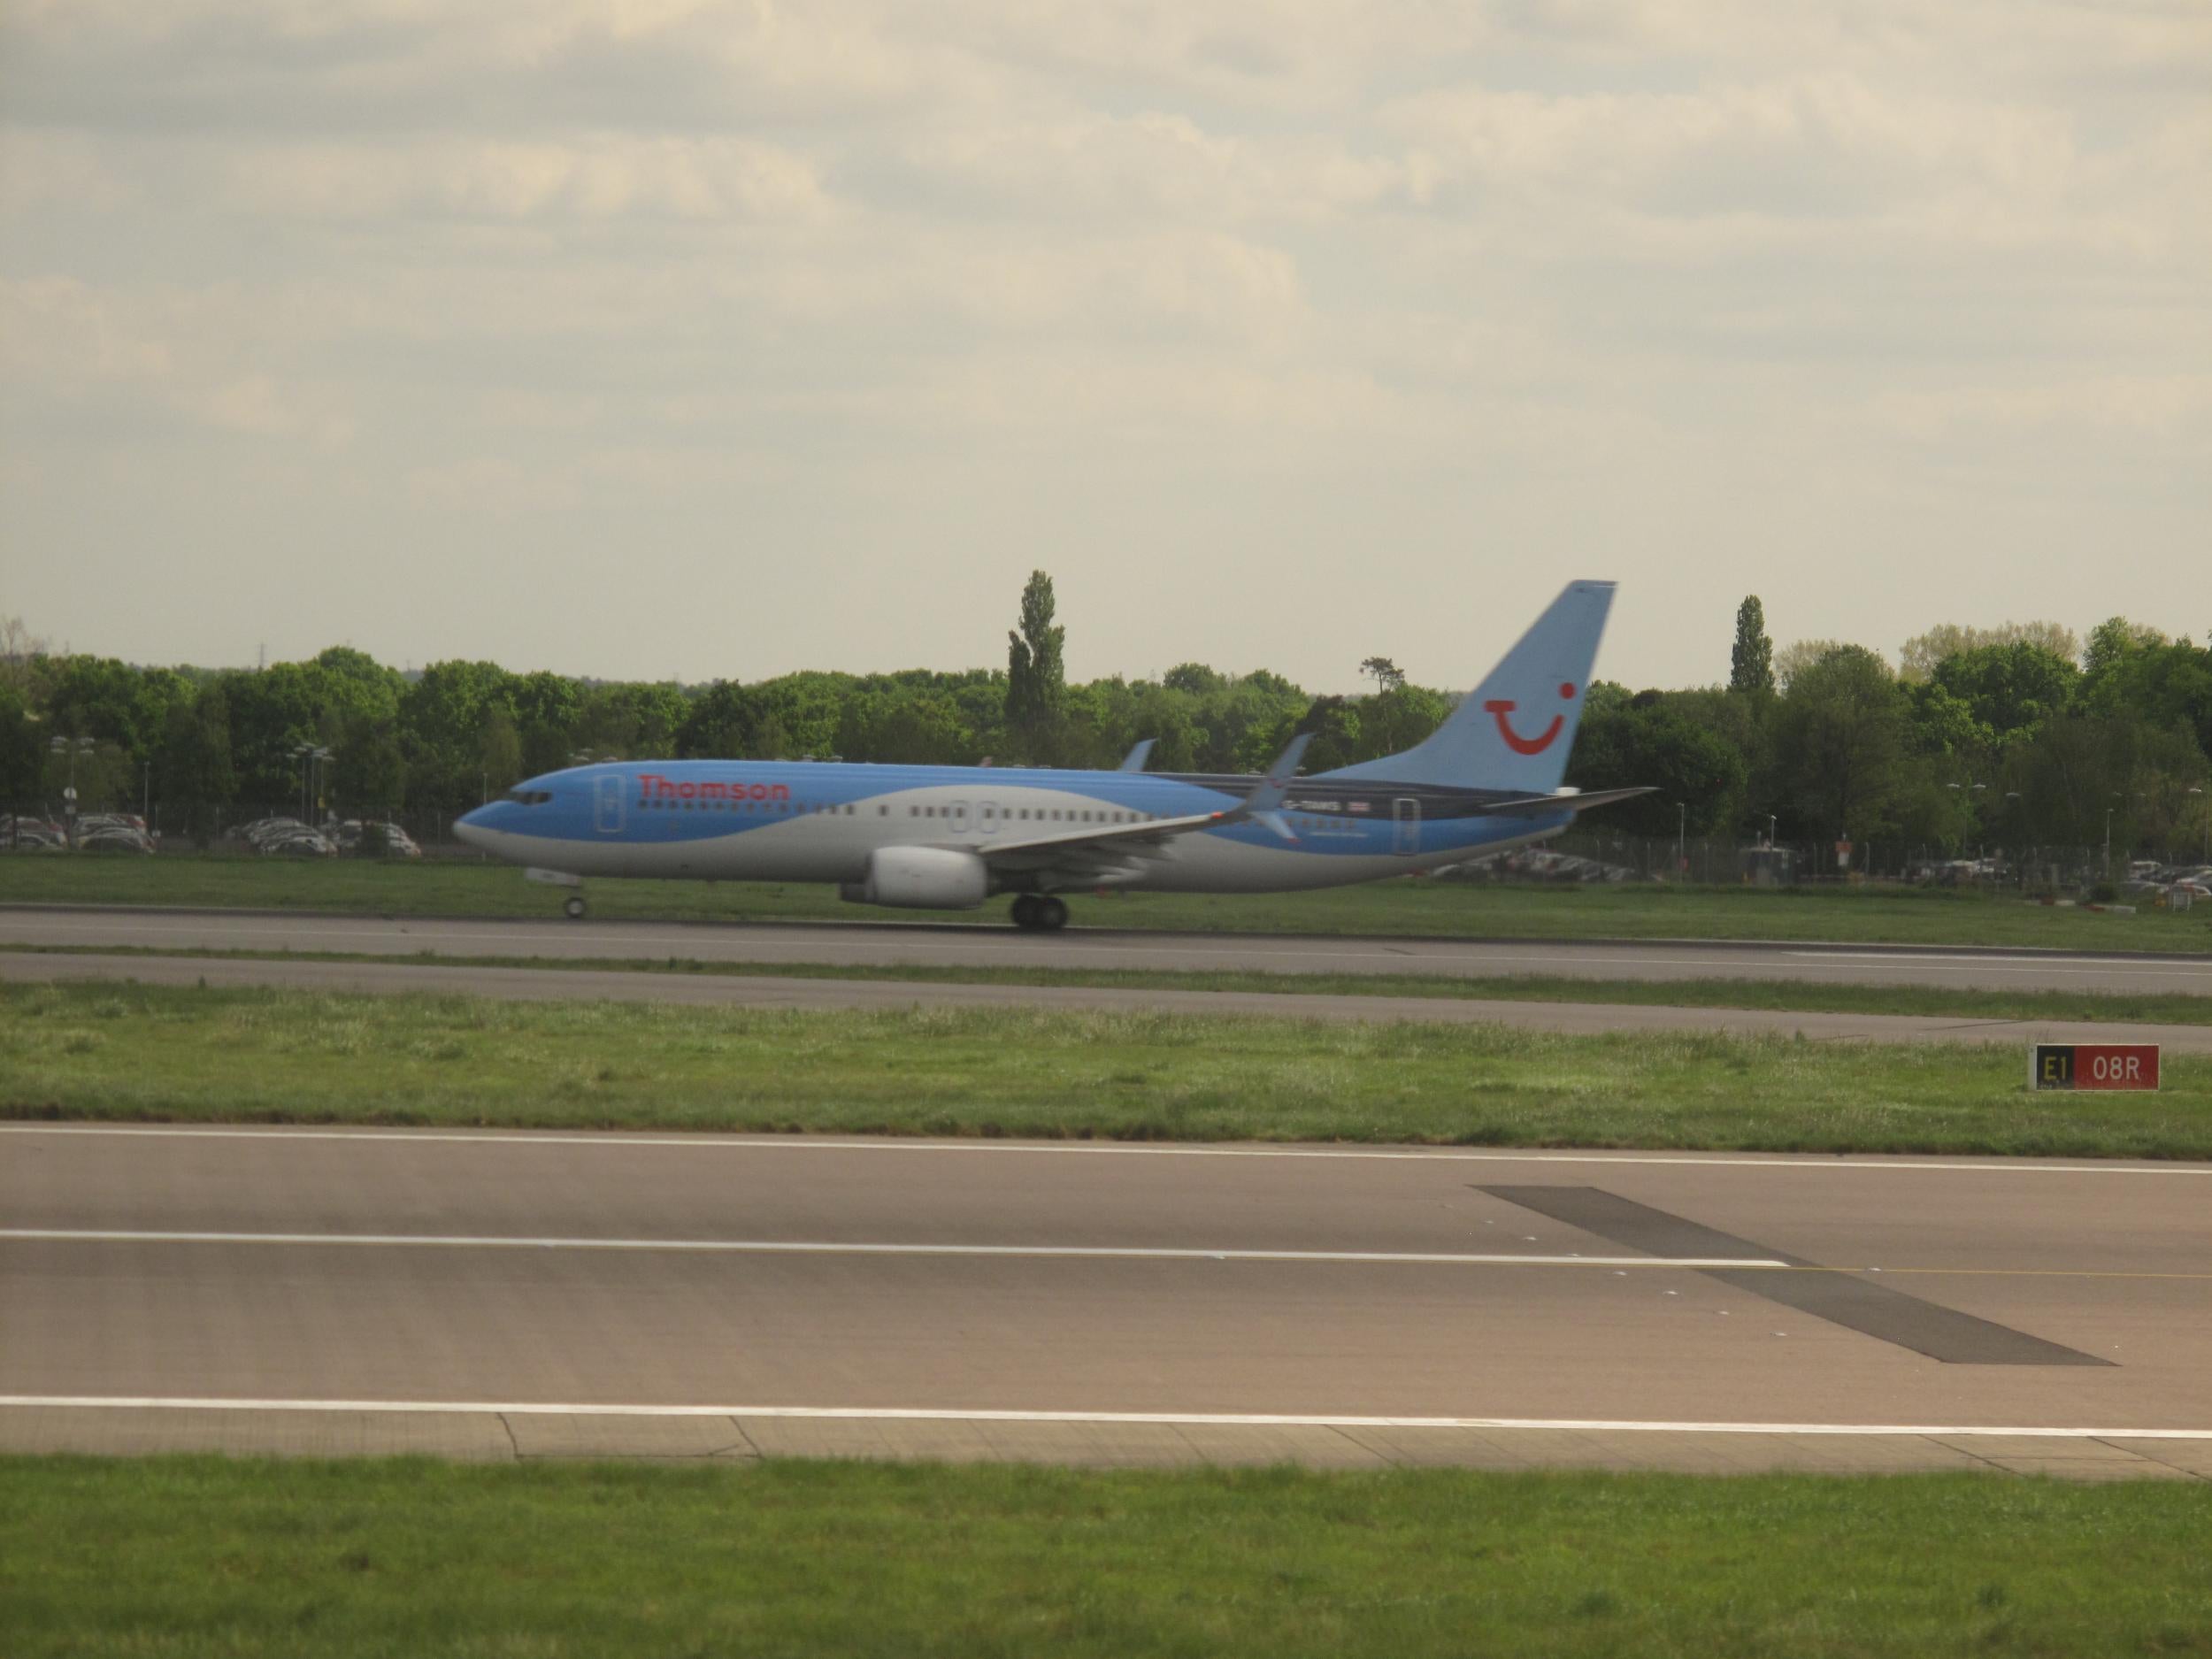 Brand value: a Boeing 737 belonging to Thomson, part of the TUI group